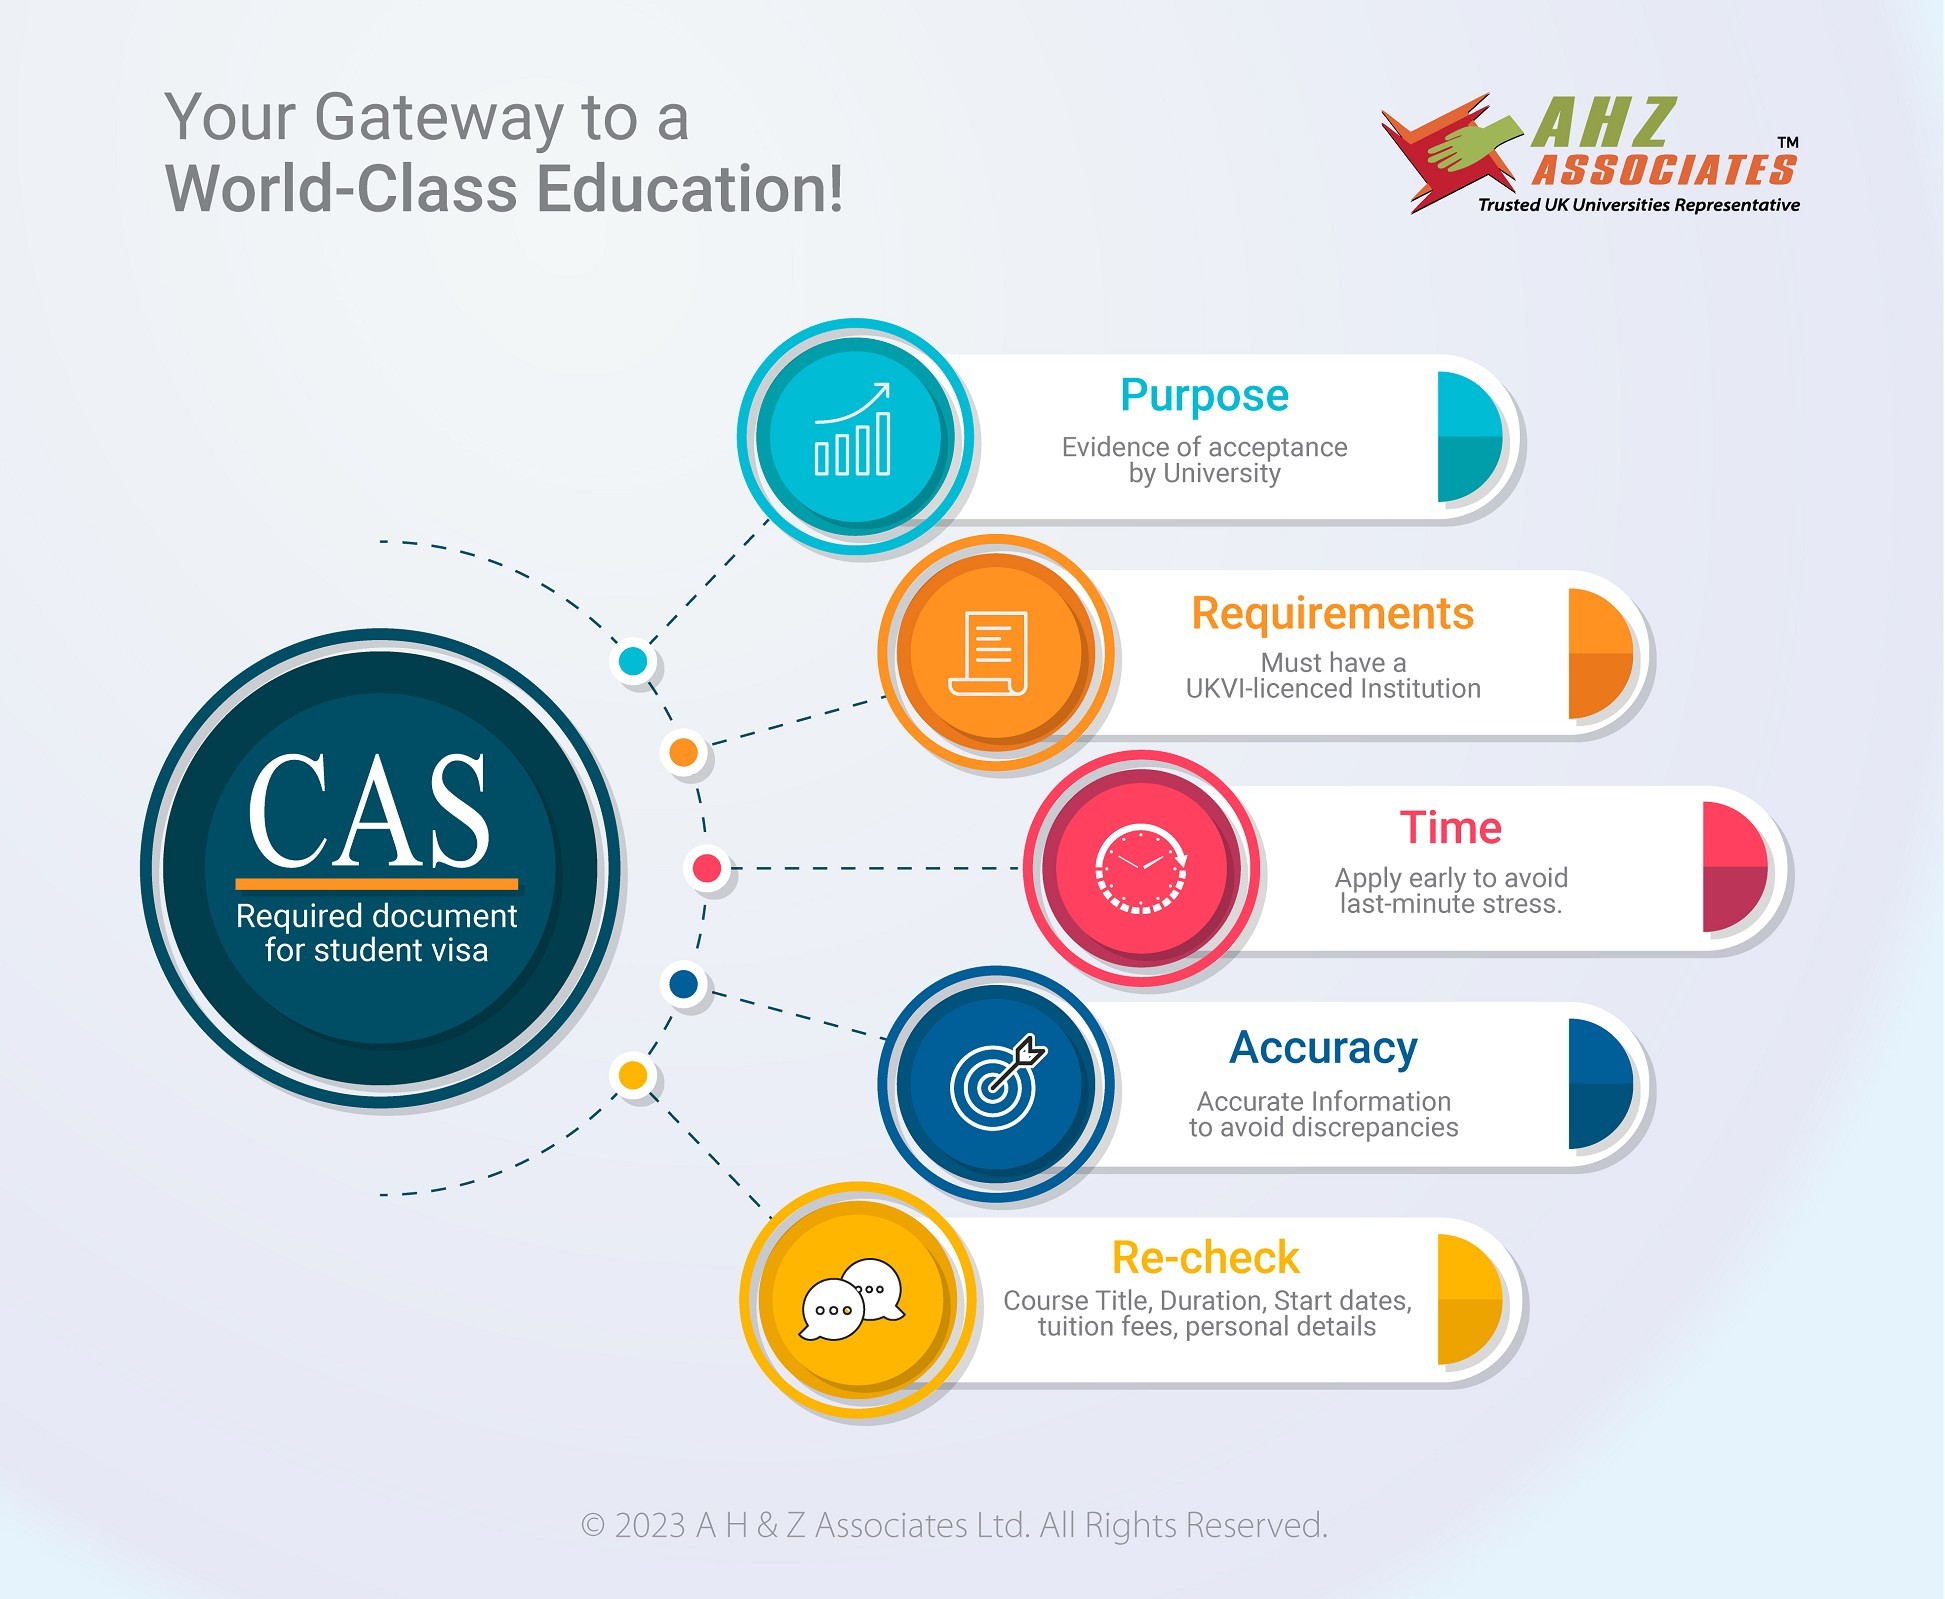 CAS Letter Your Gateway to UK World-Class Education!